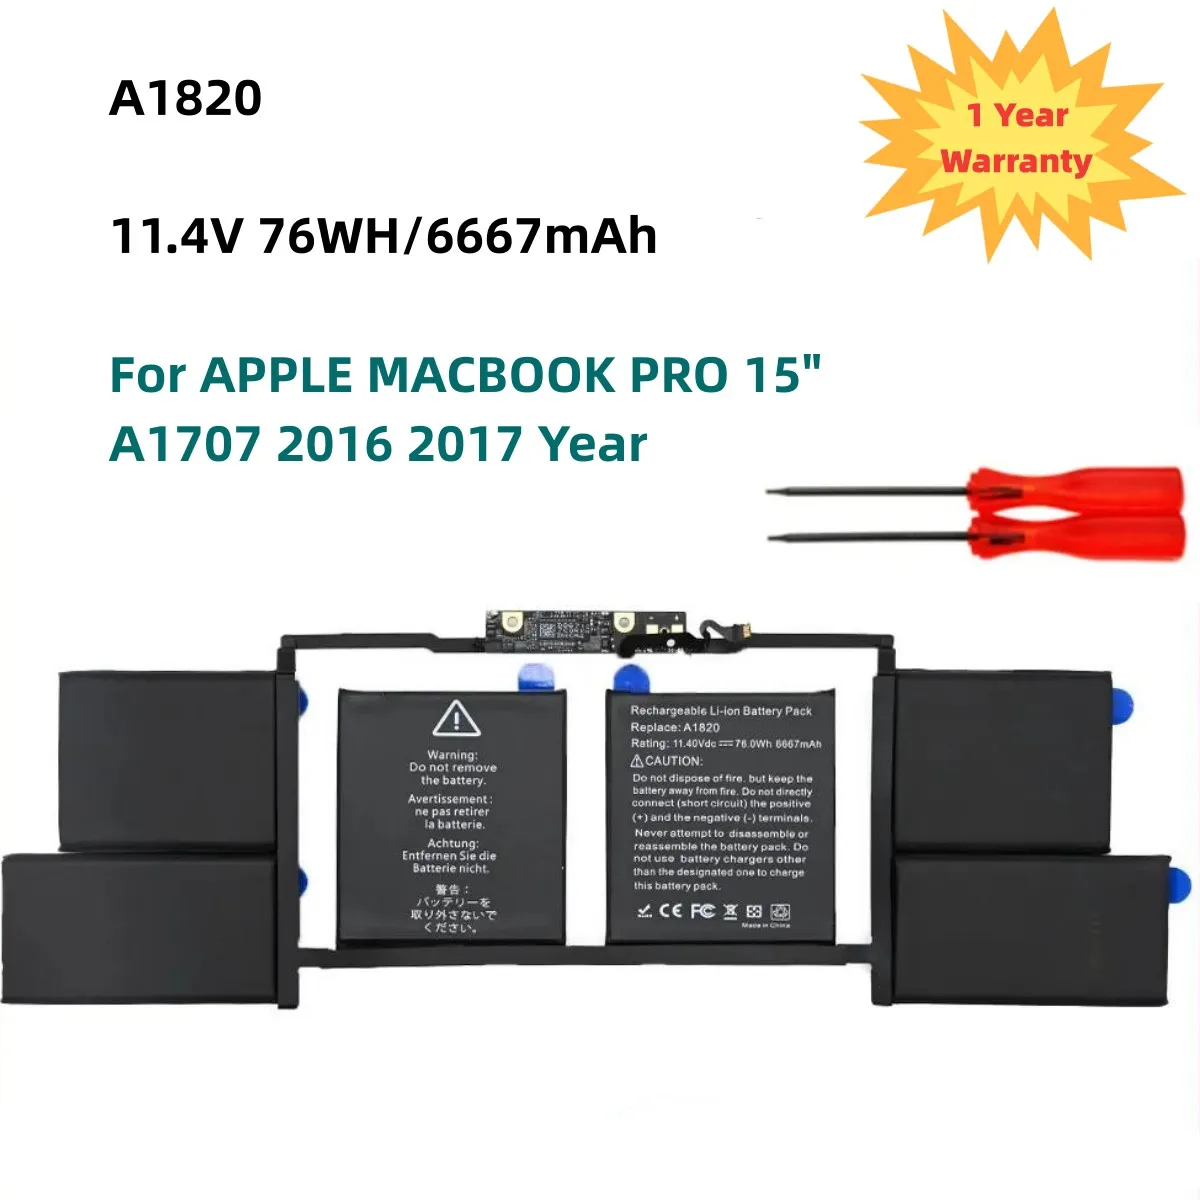 

New A1820 Laptop Battery For APPLE MACBOOK PRO 15" A1707 2016 2017 Year 11.4V 76WH/6667mAh